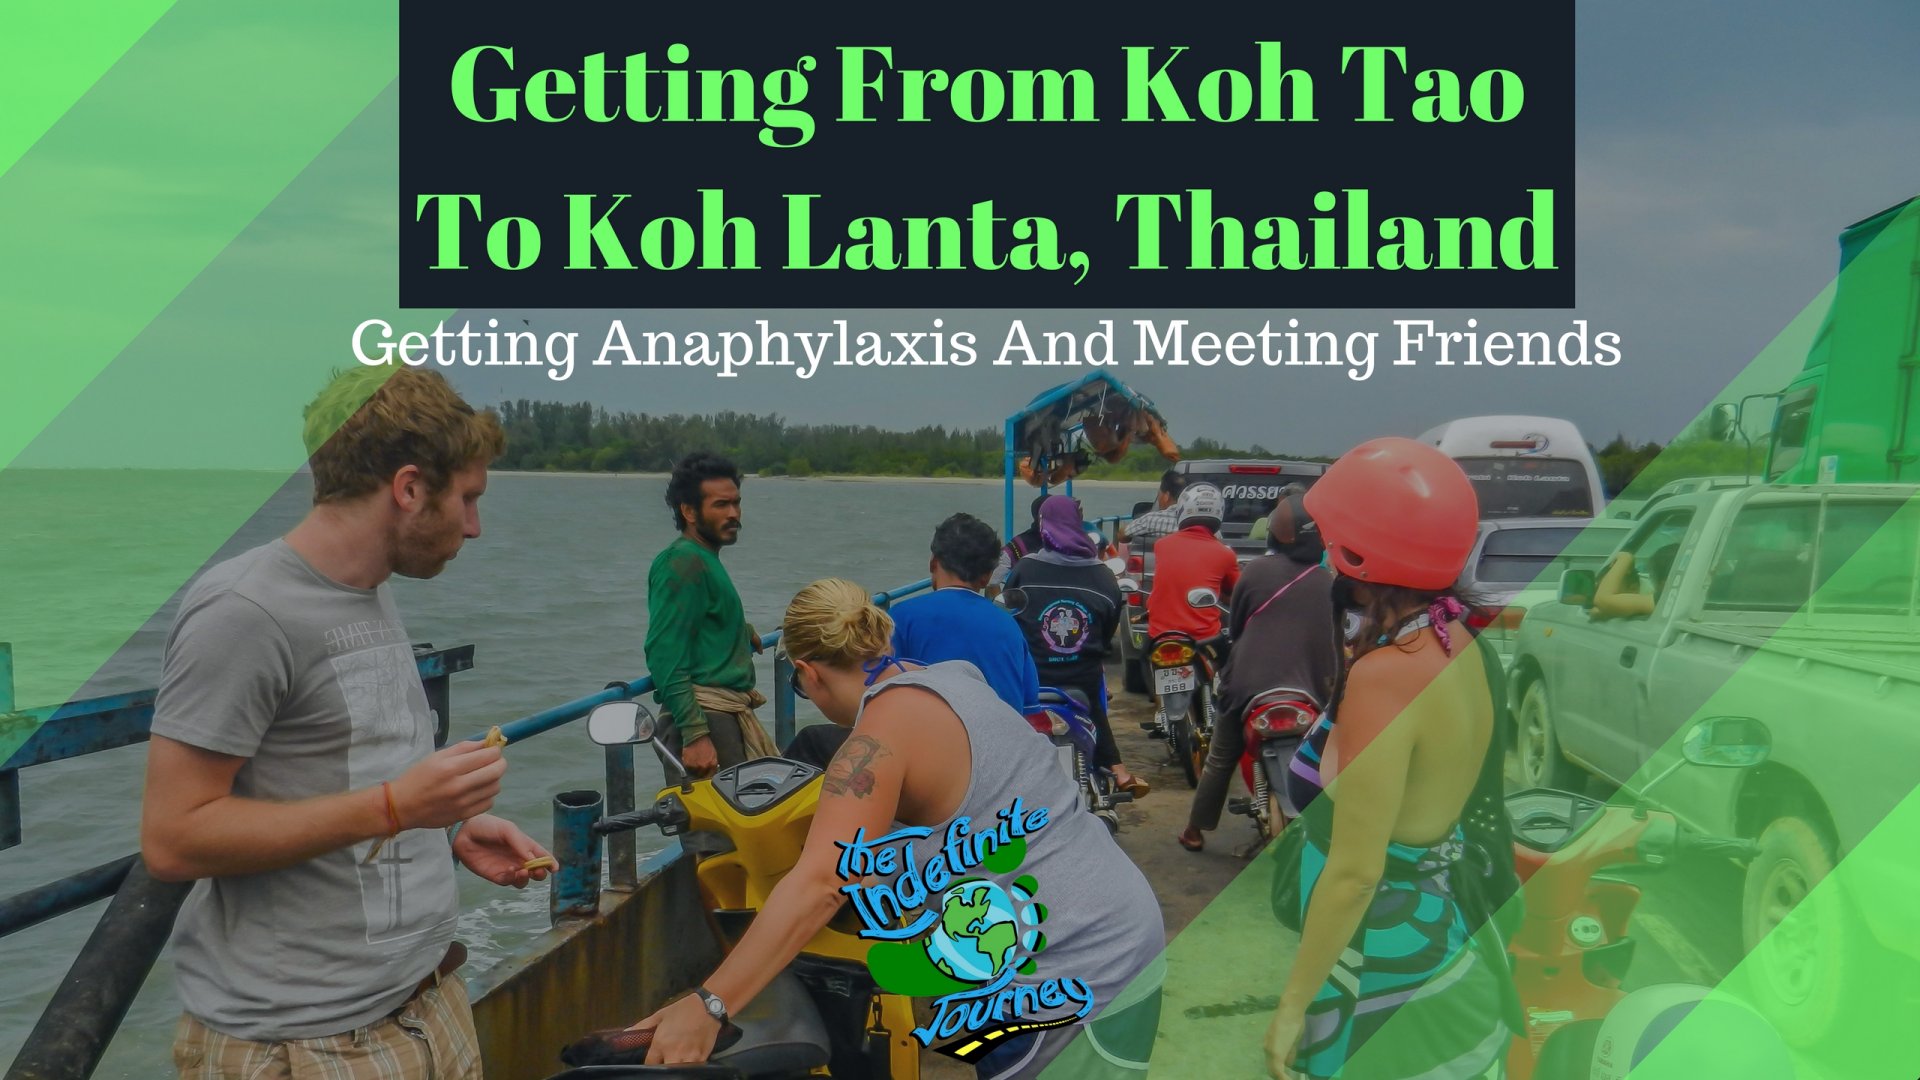 Getting From Koh Tao to Koh Lanta, Thailand -Getting Anaphylaxis And Meeting Friends